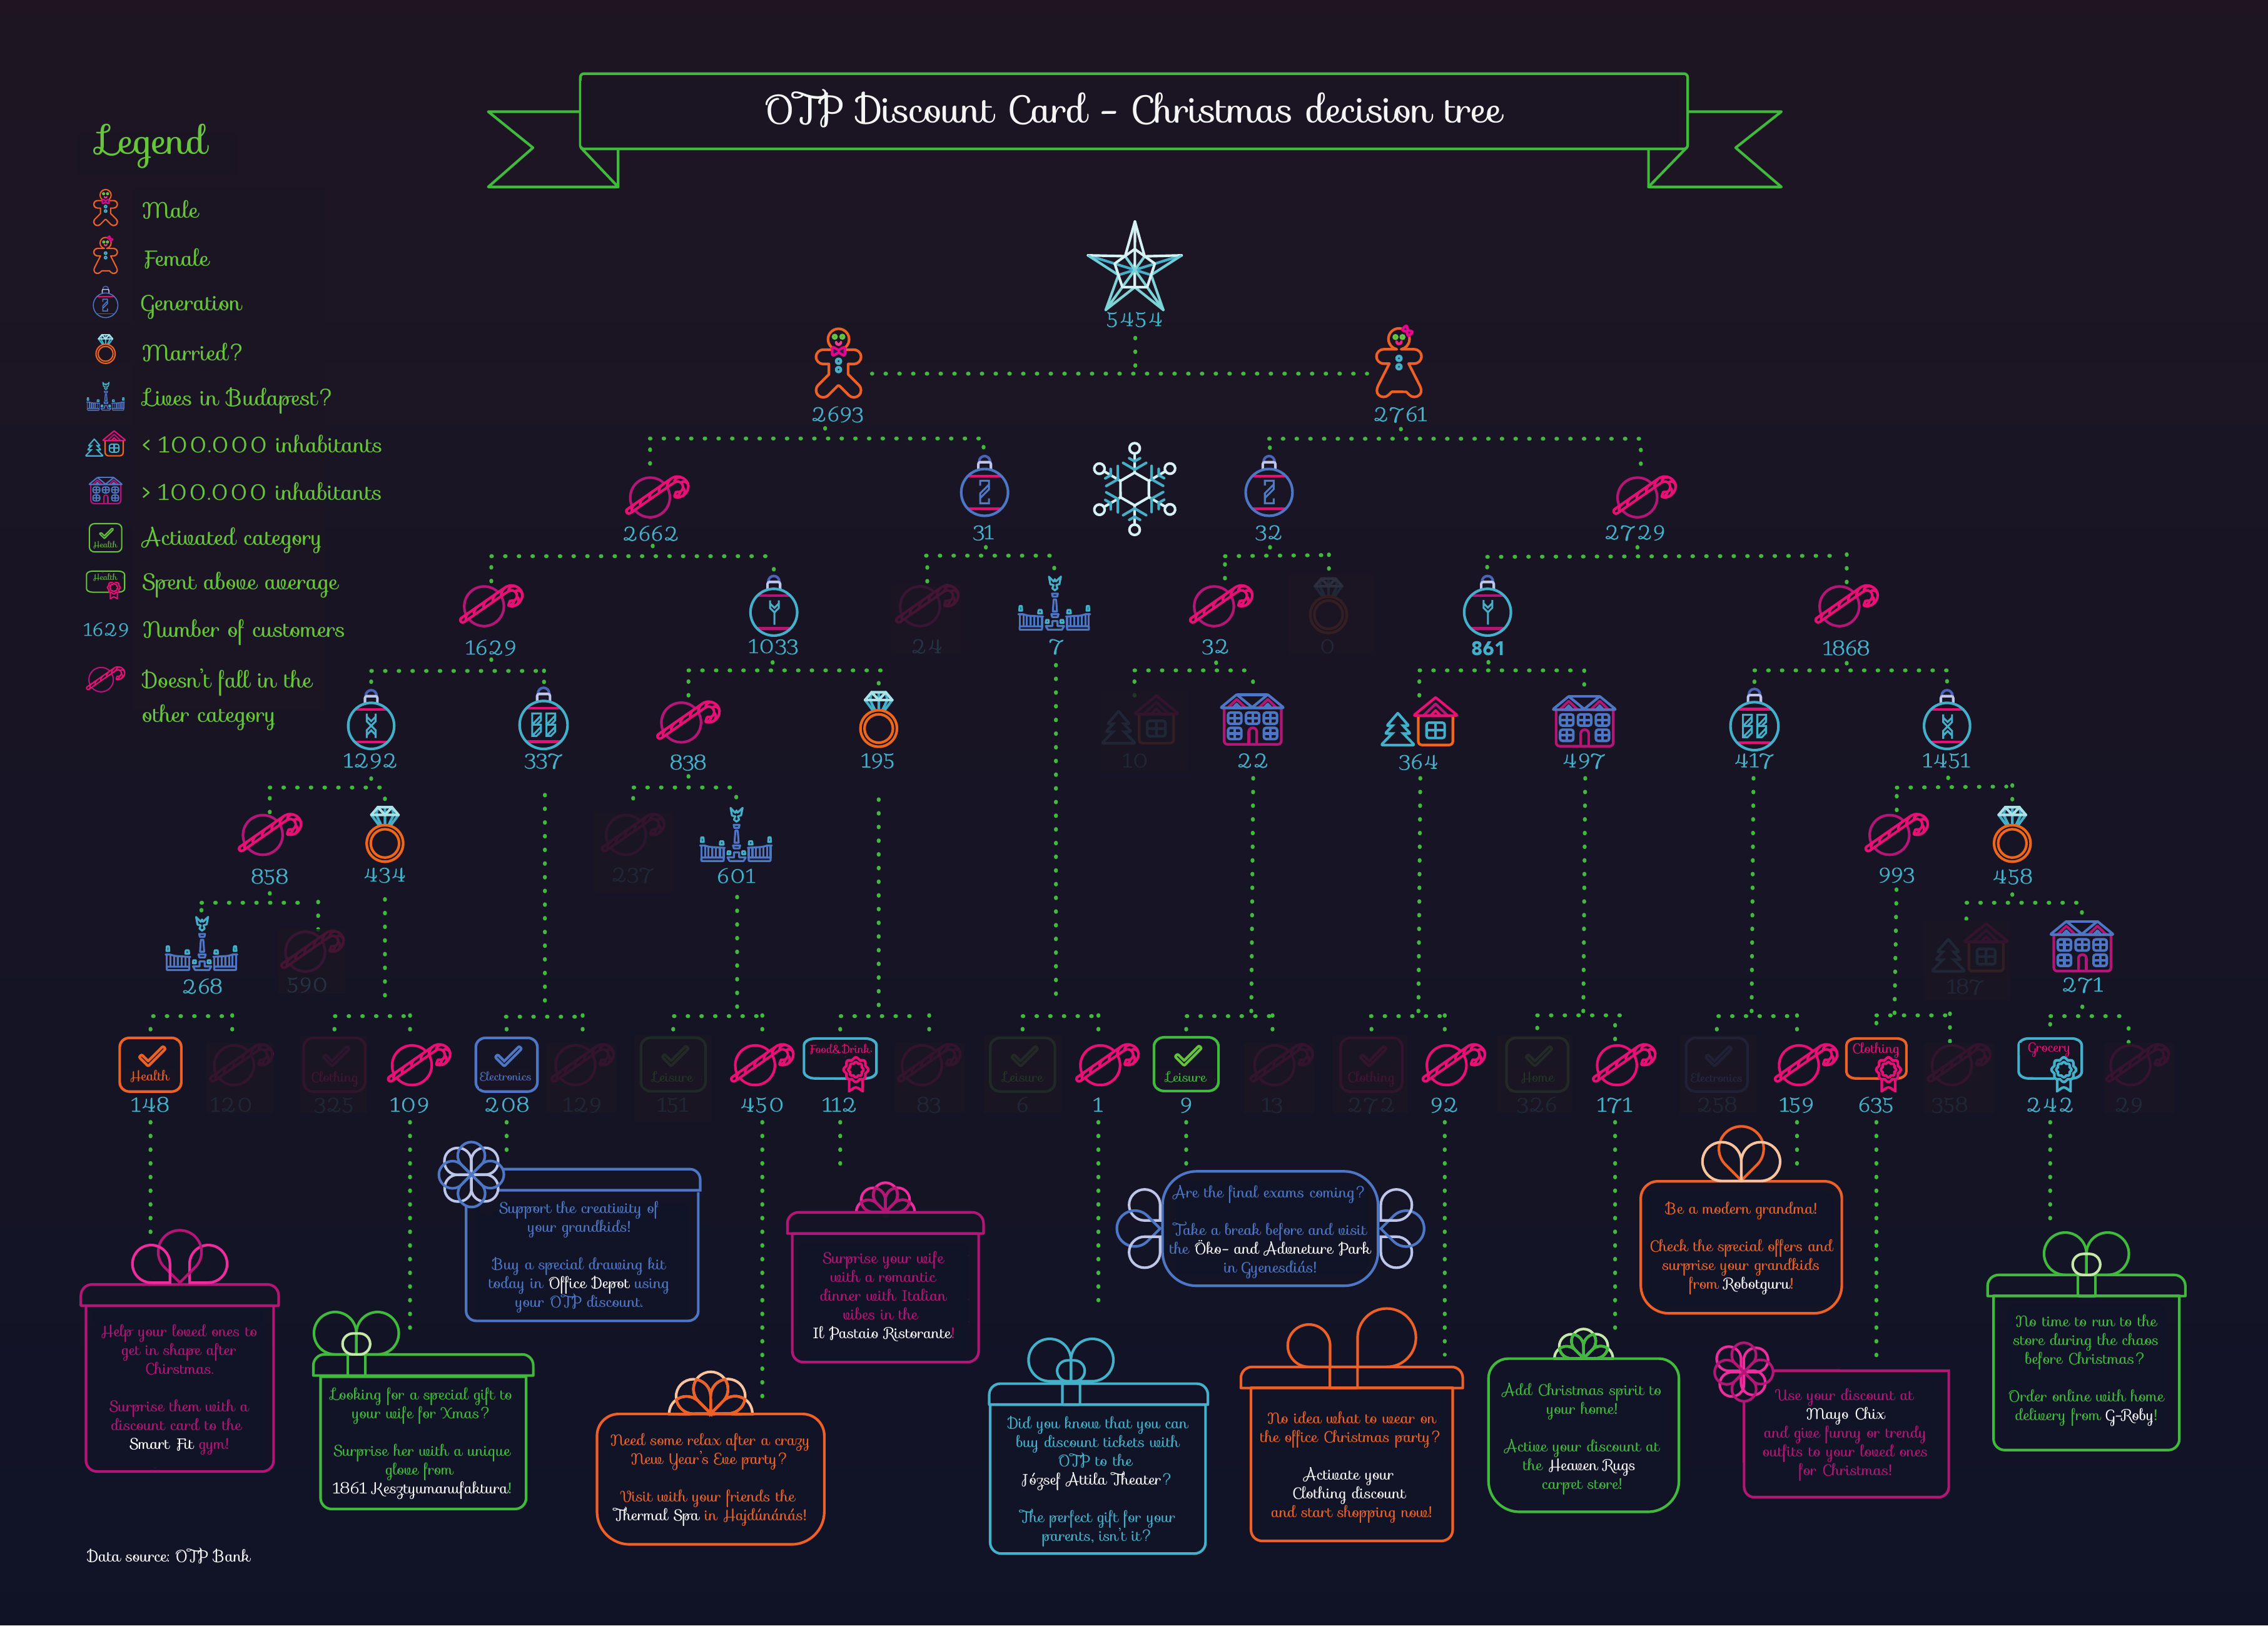 OTP discount card - Christmas decision tree